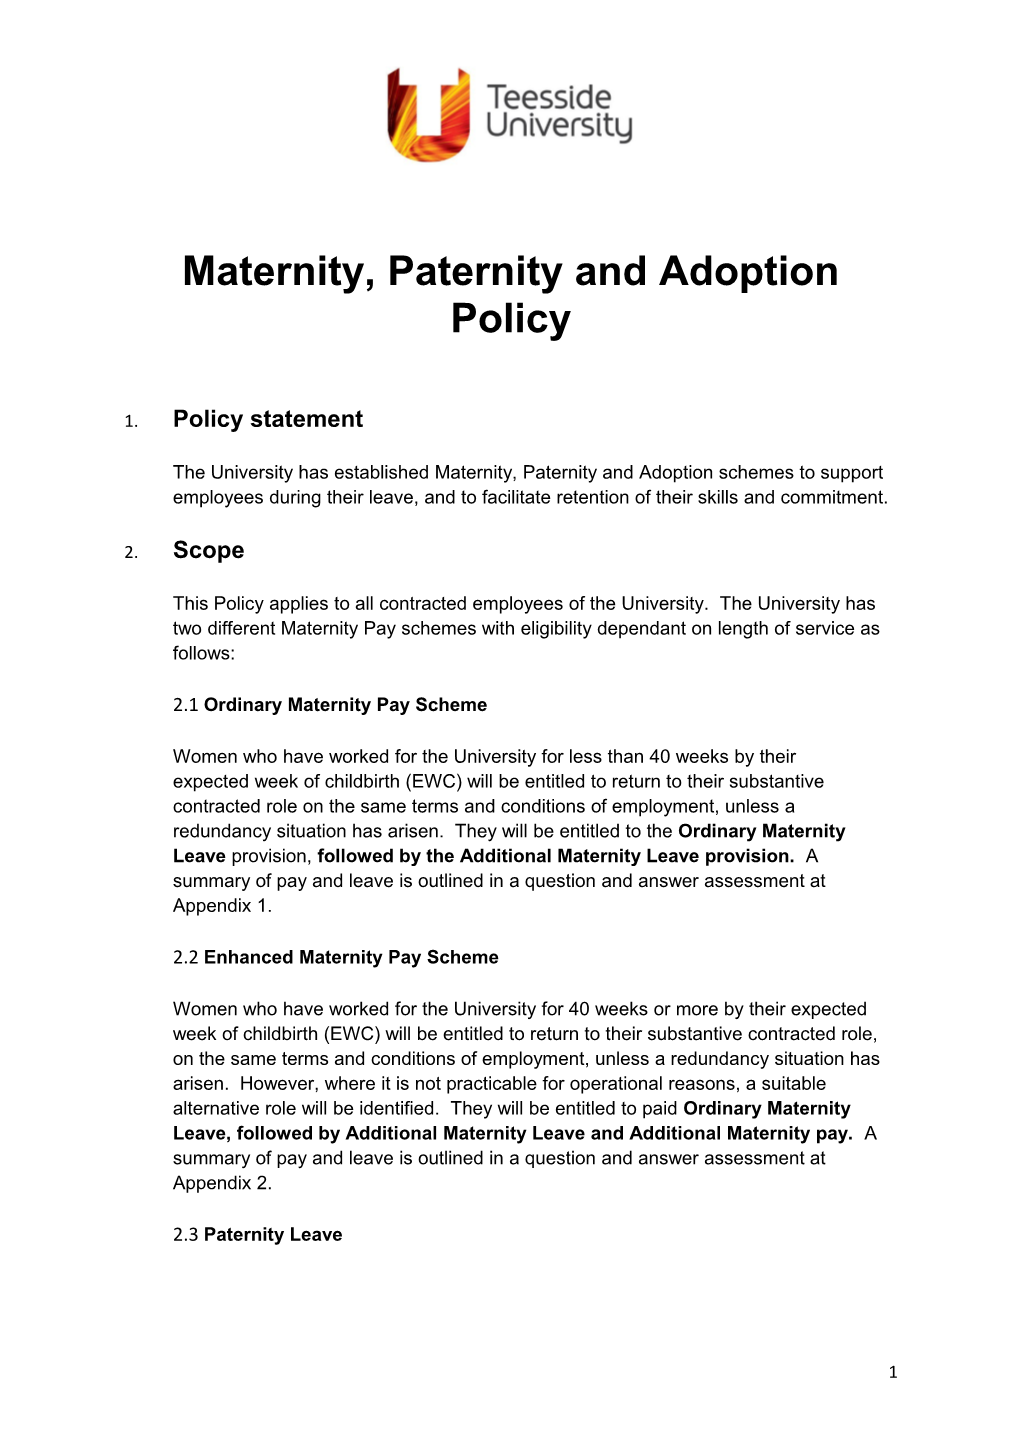 Maternity, Paternity and Adoption Policy